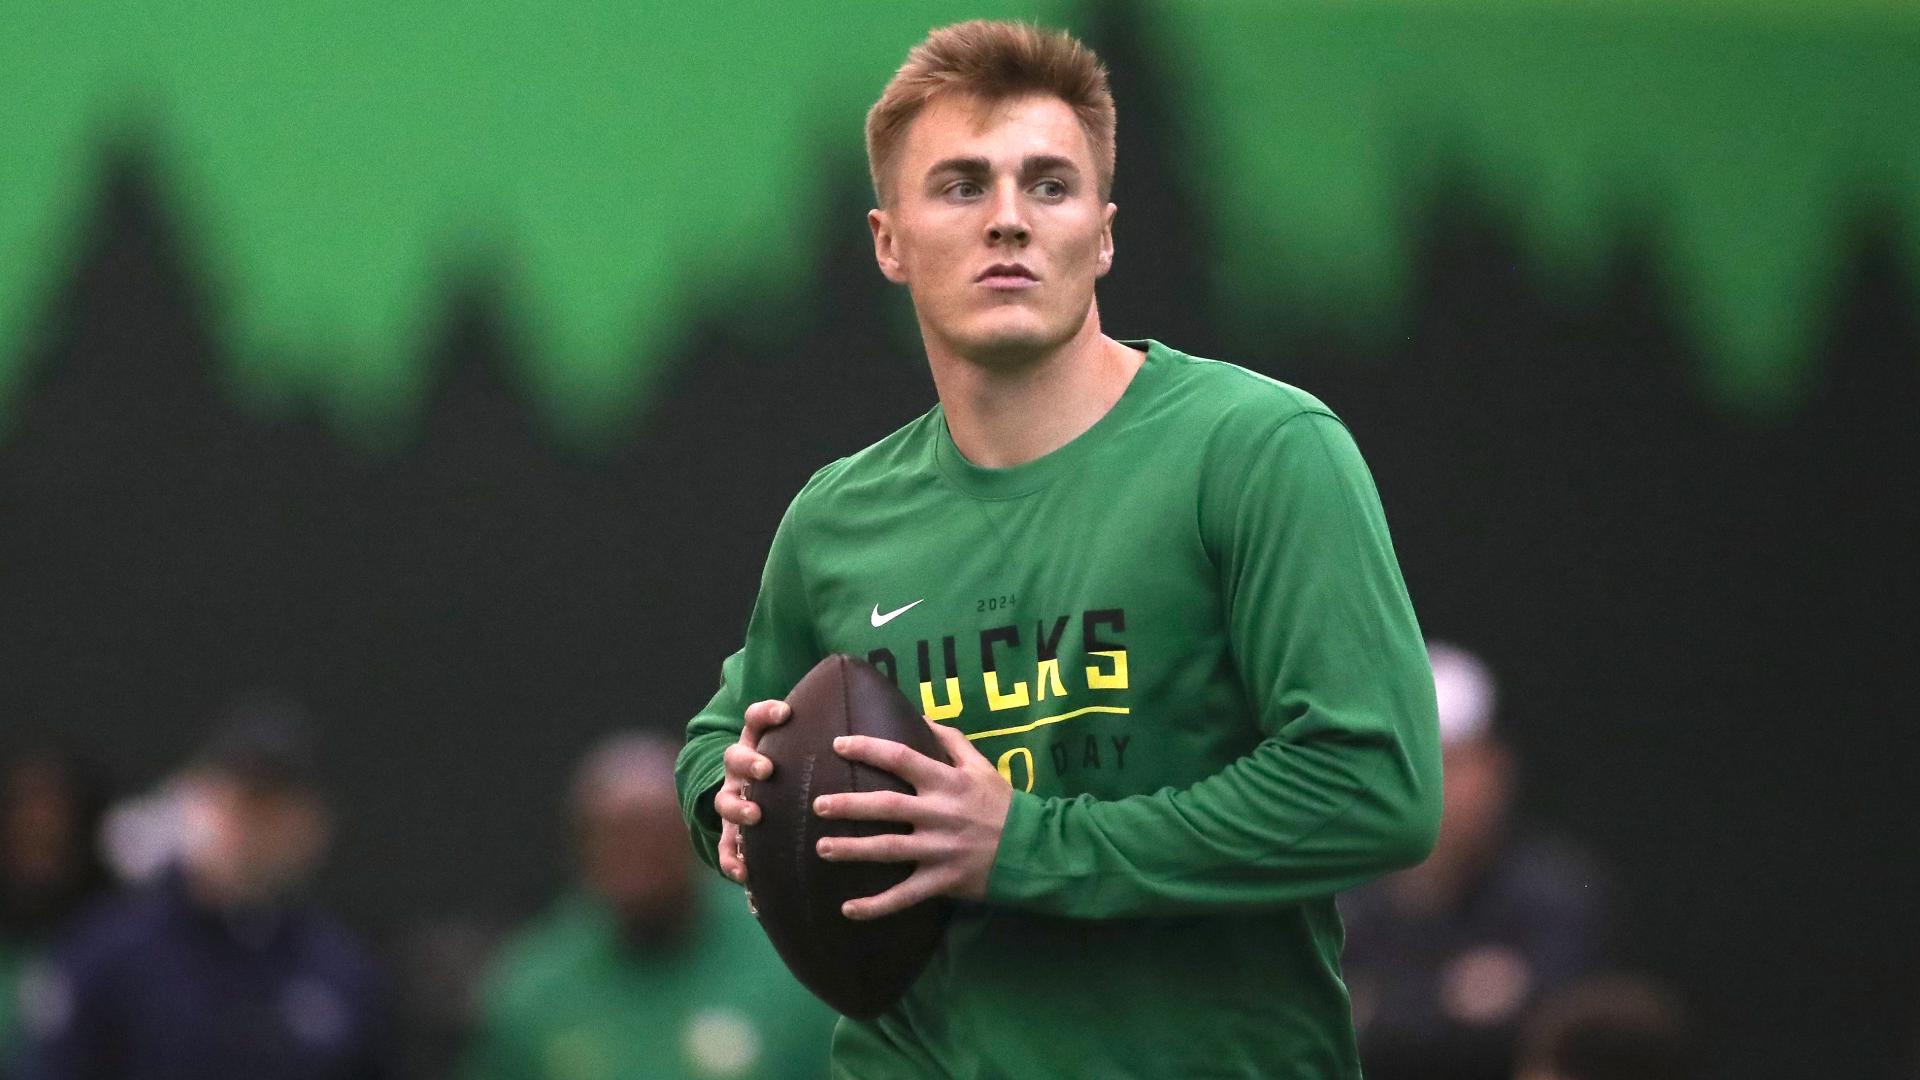 A 5-year college starter at Auburn and Oregon, Bo Nix is an older prospect at 24. But that should mean he's pro ready.